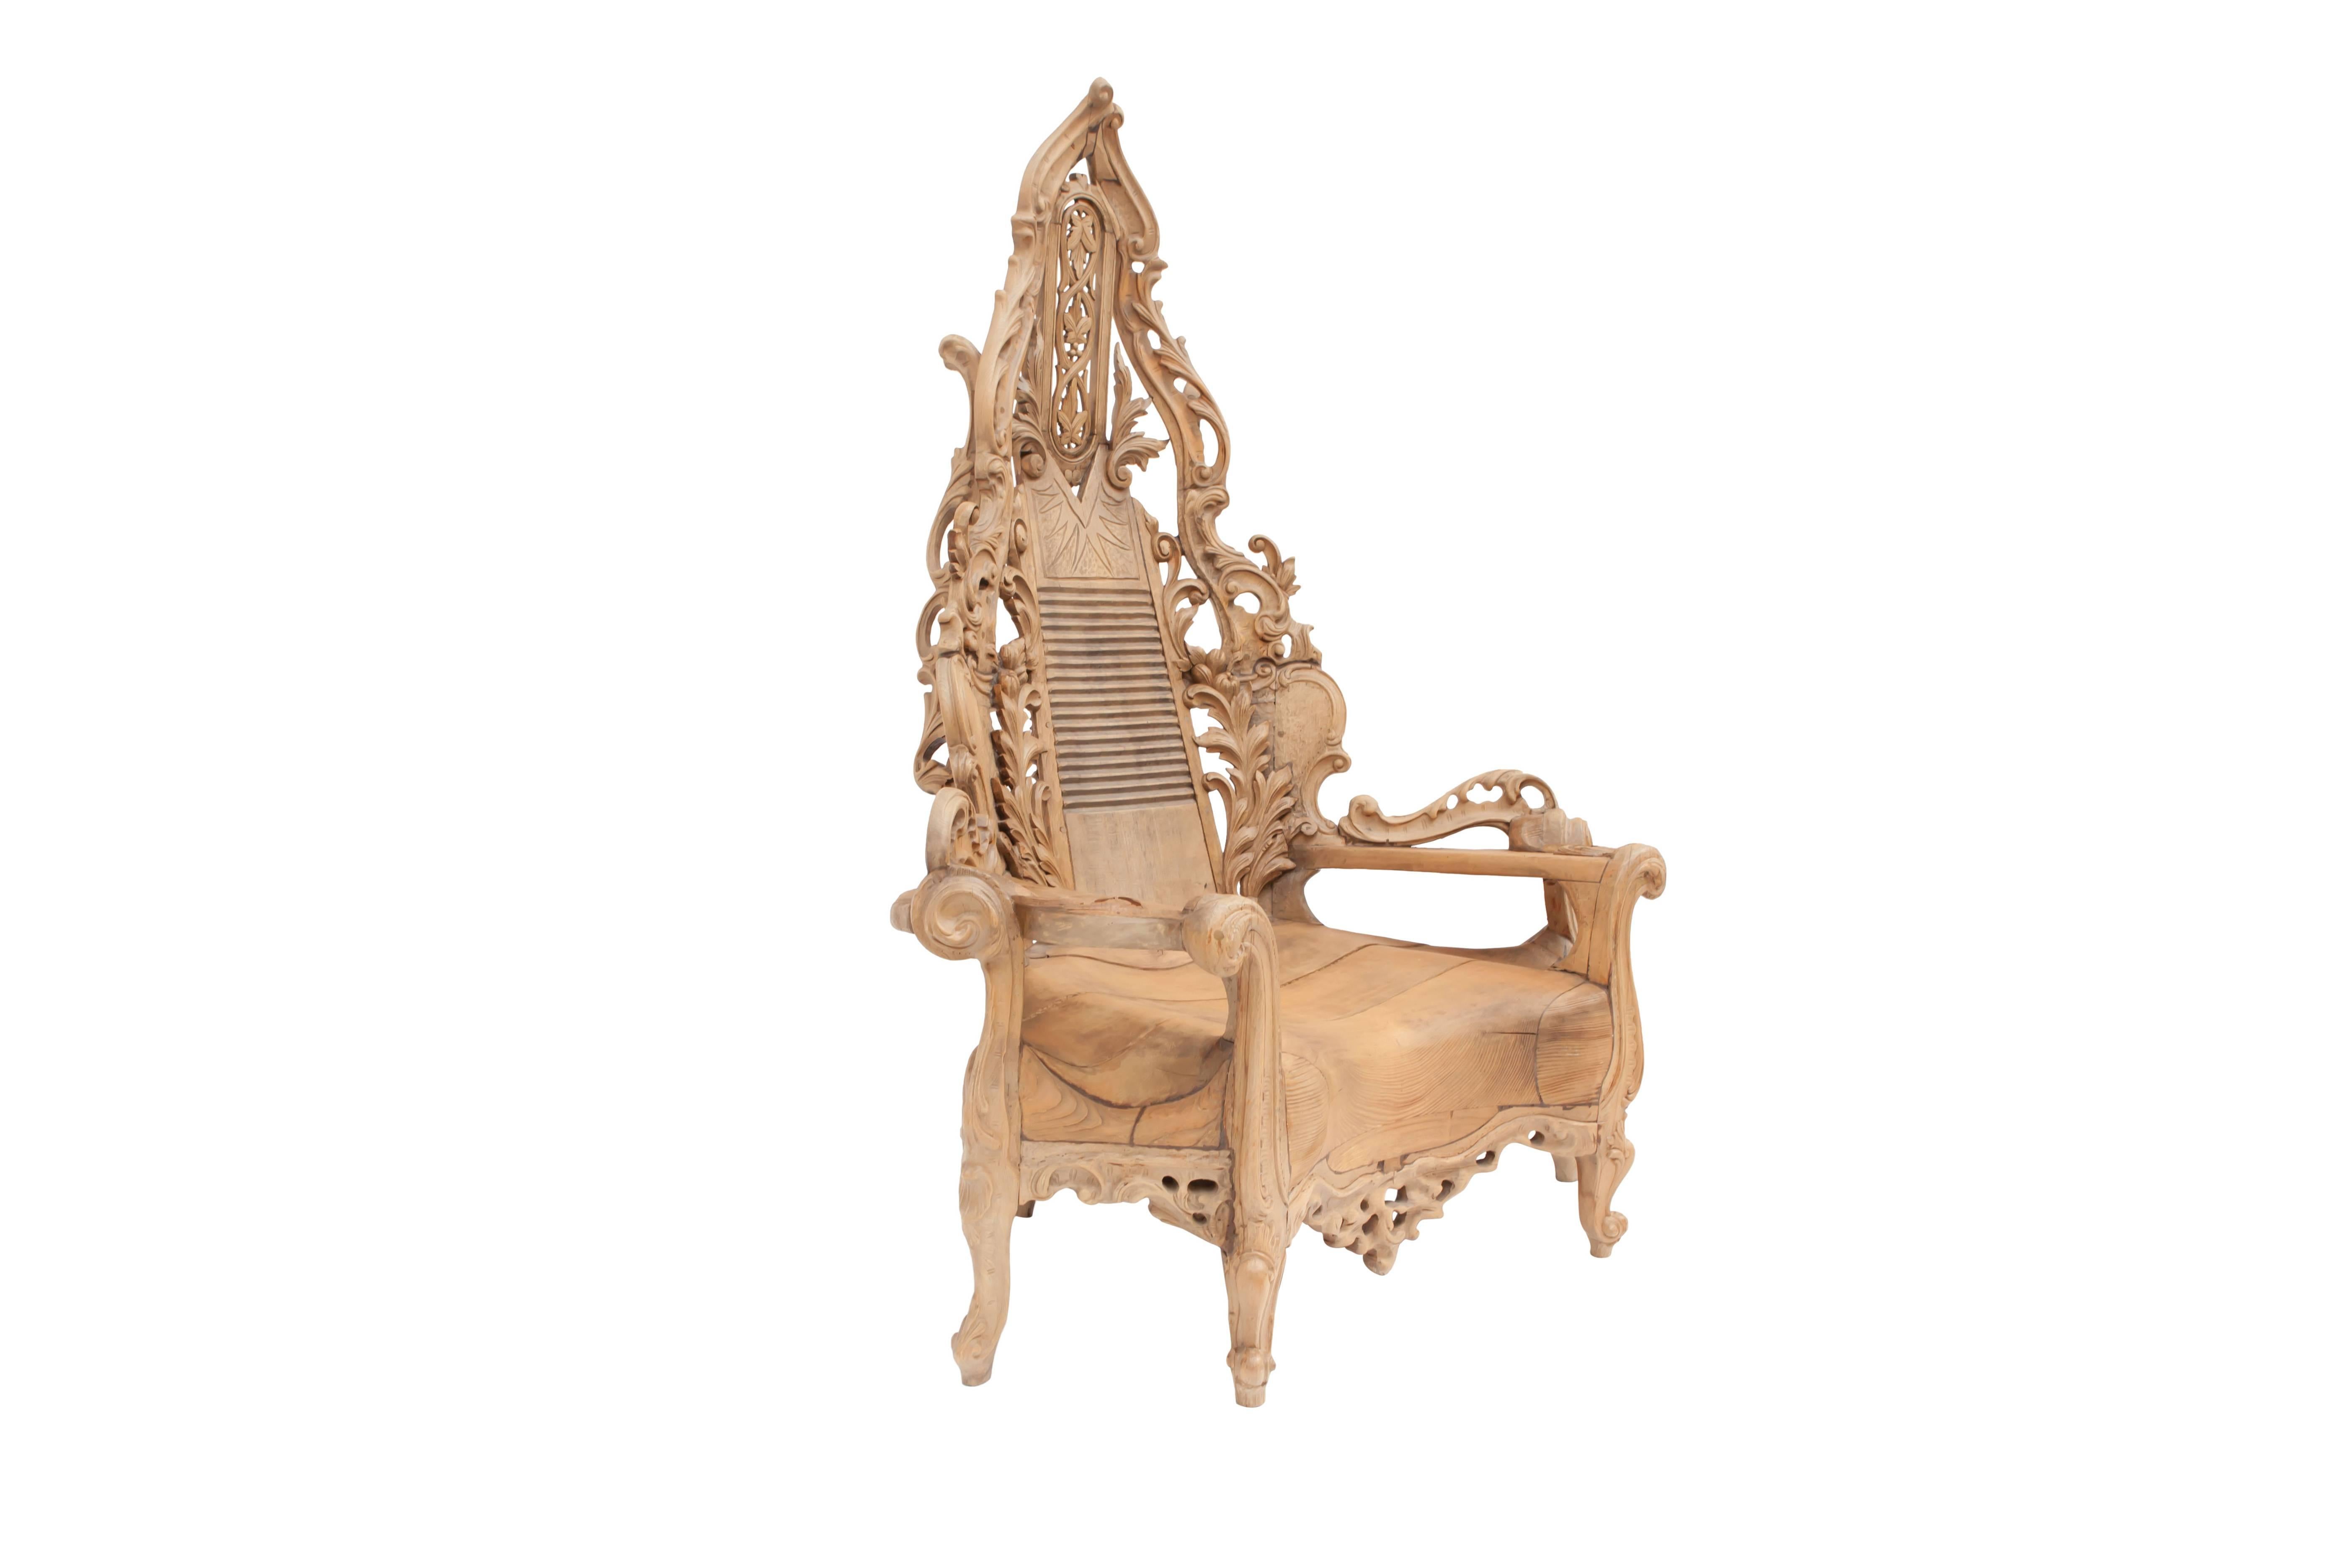 Ornamental wooden throne chair, impressive in design and size.
hand-carved by a late French Brettonian artist in middle of the 20th century.
This remains an eye-catching piece in many different interiors.
Measures: H 166 cm D 79 cm W 126 cm.